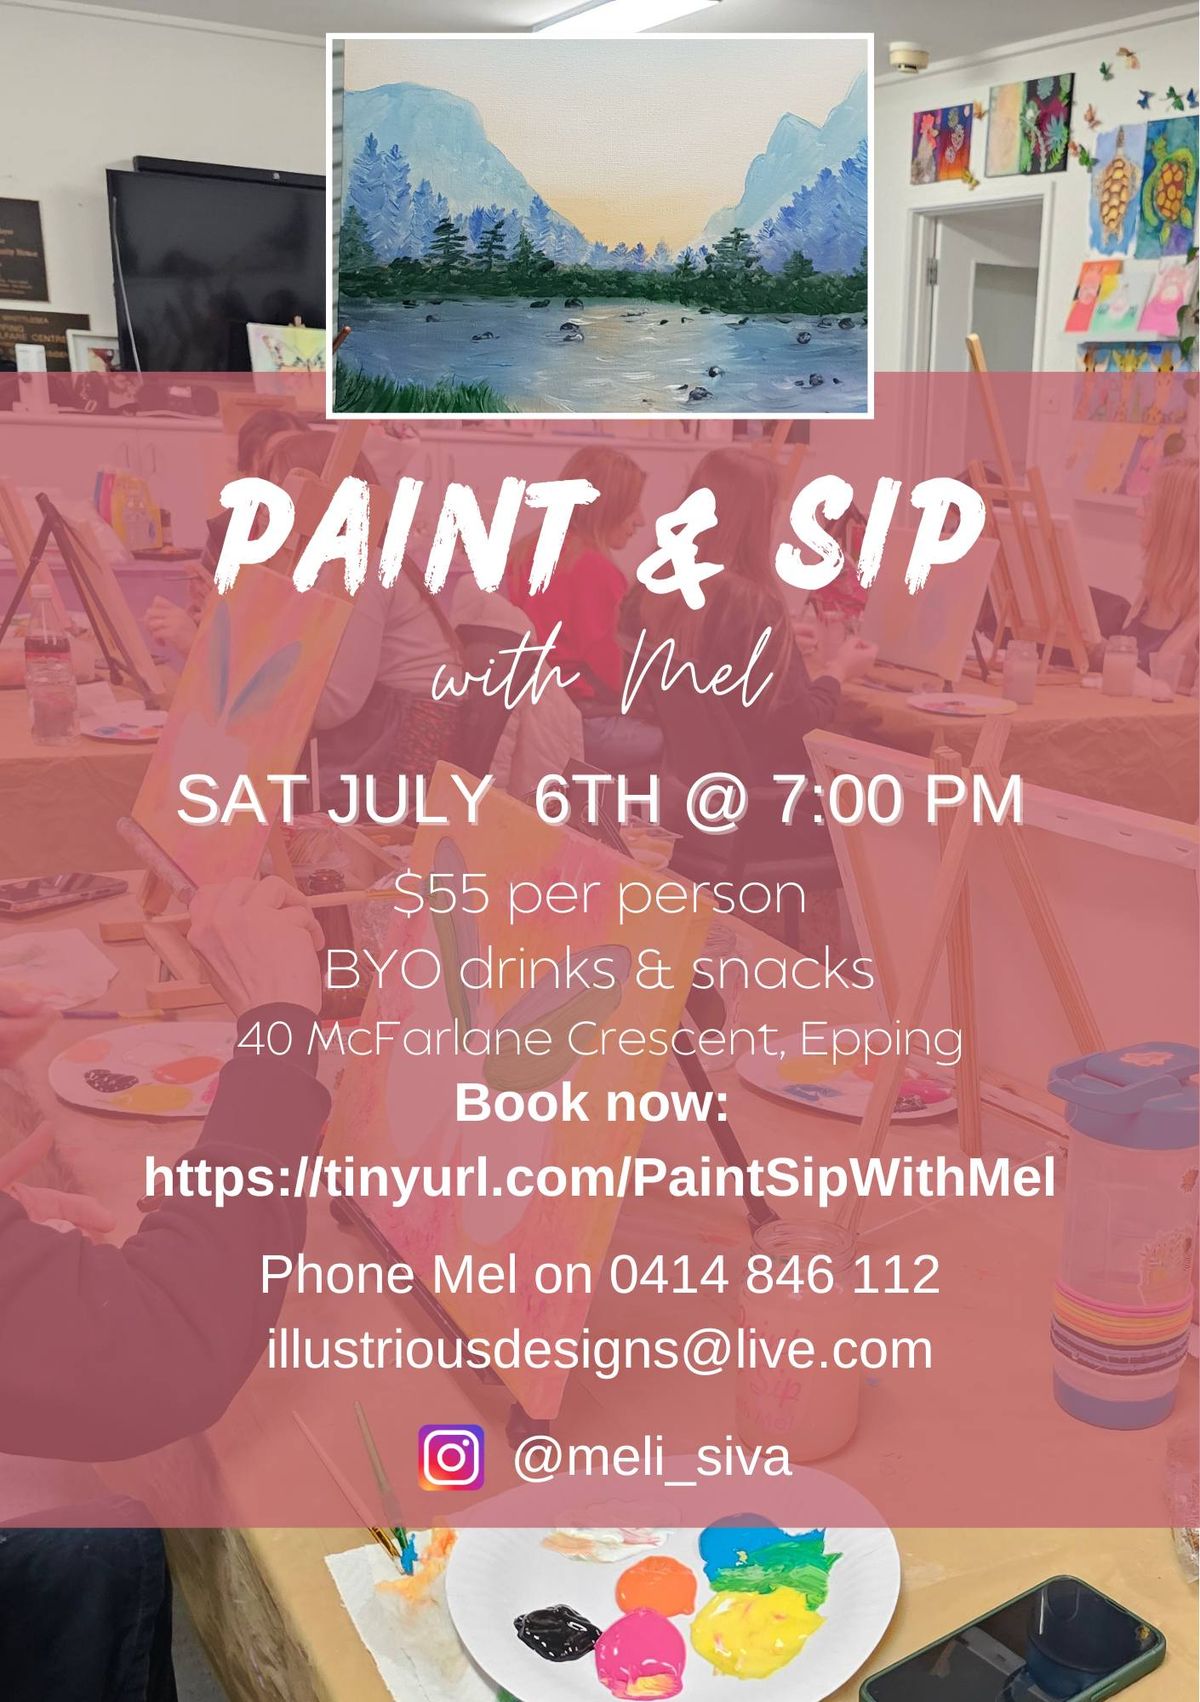 PAINT & SIP with Mel